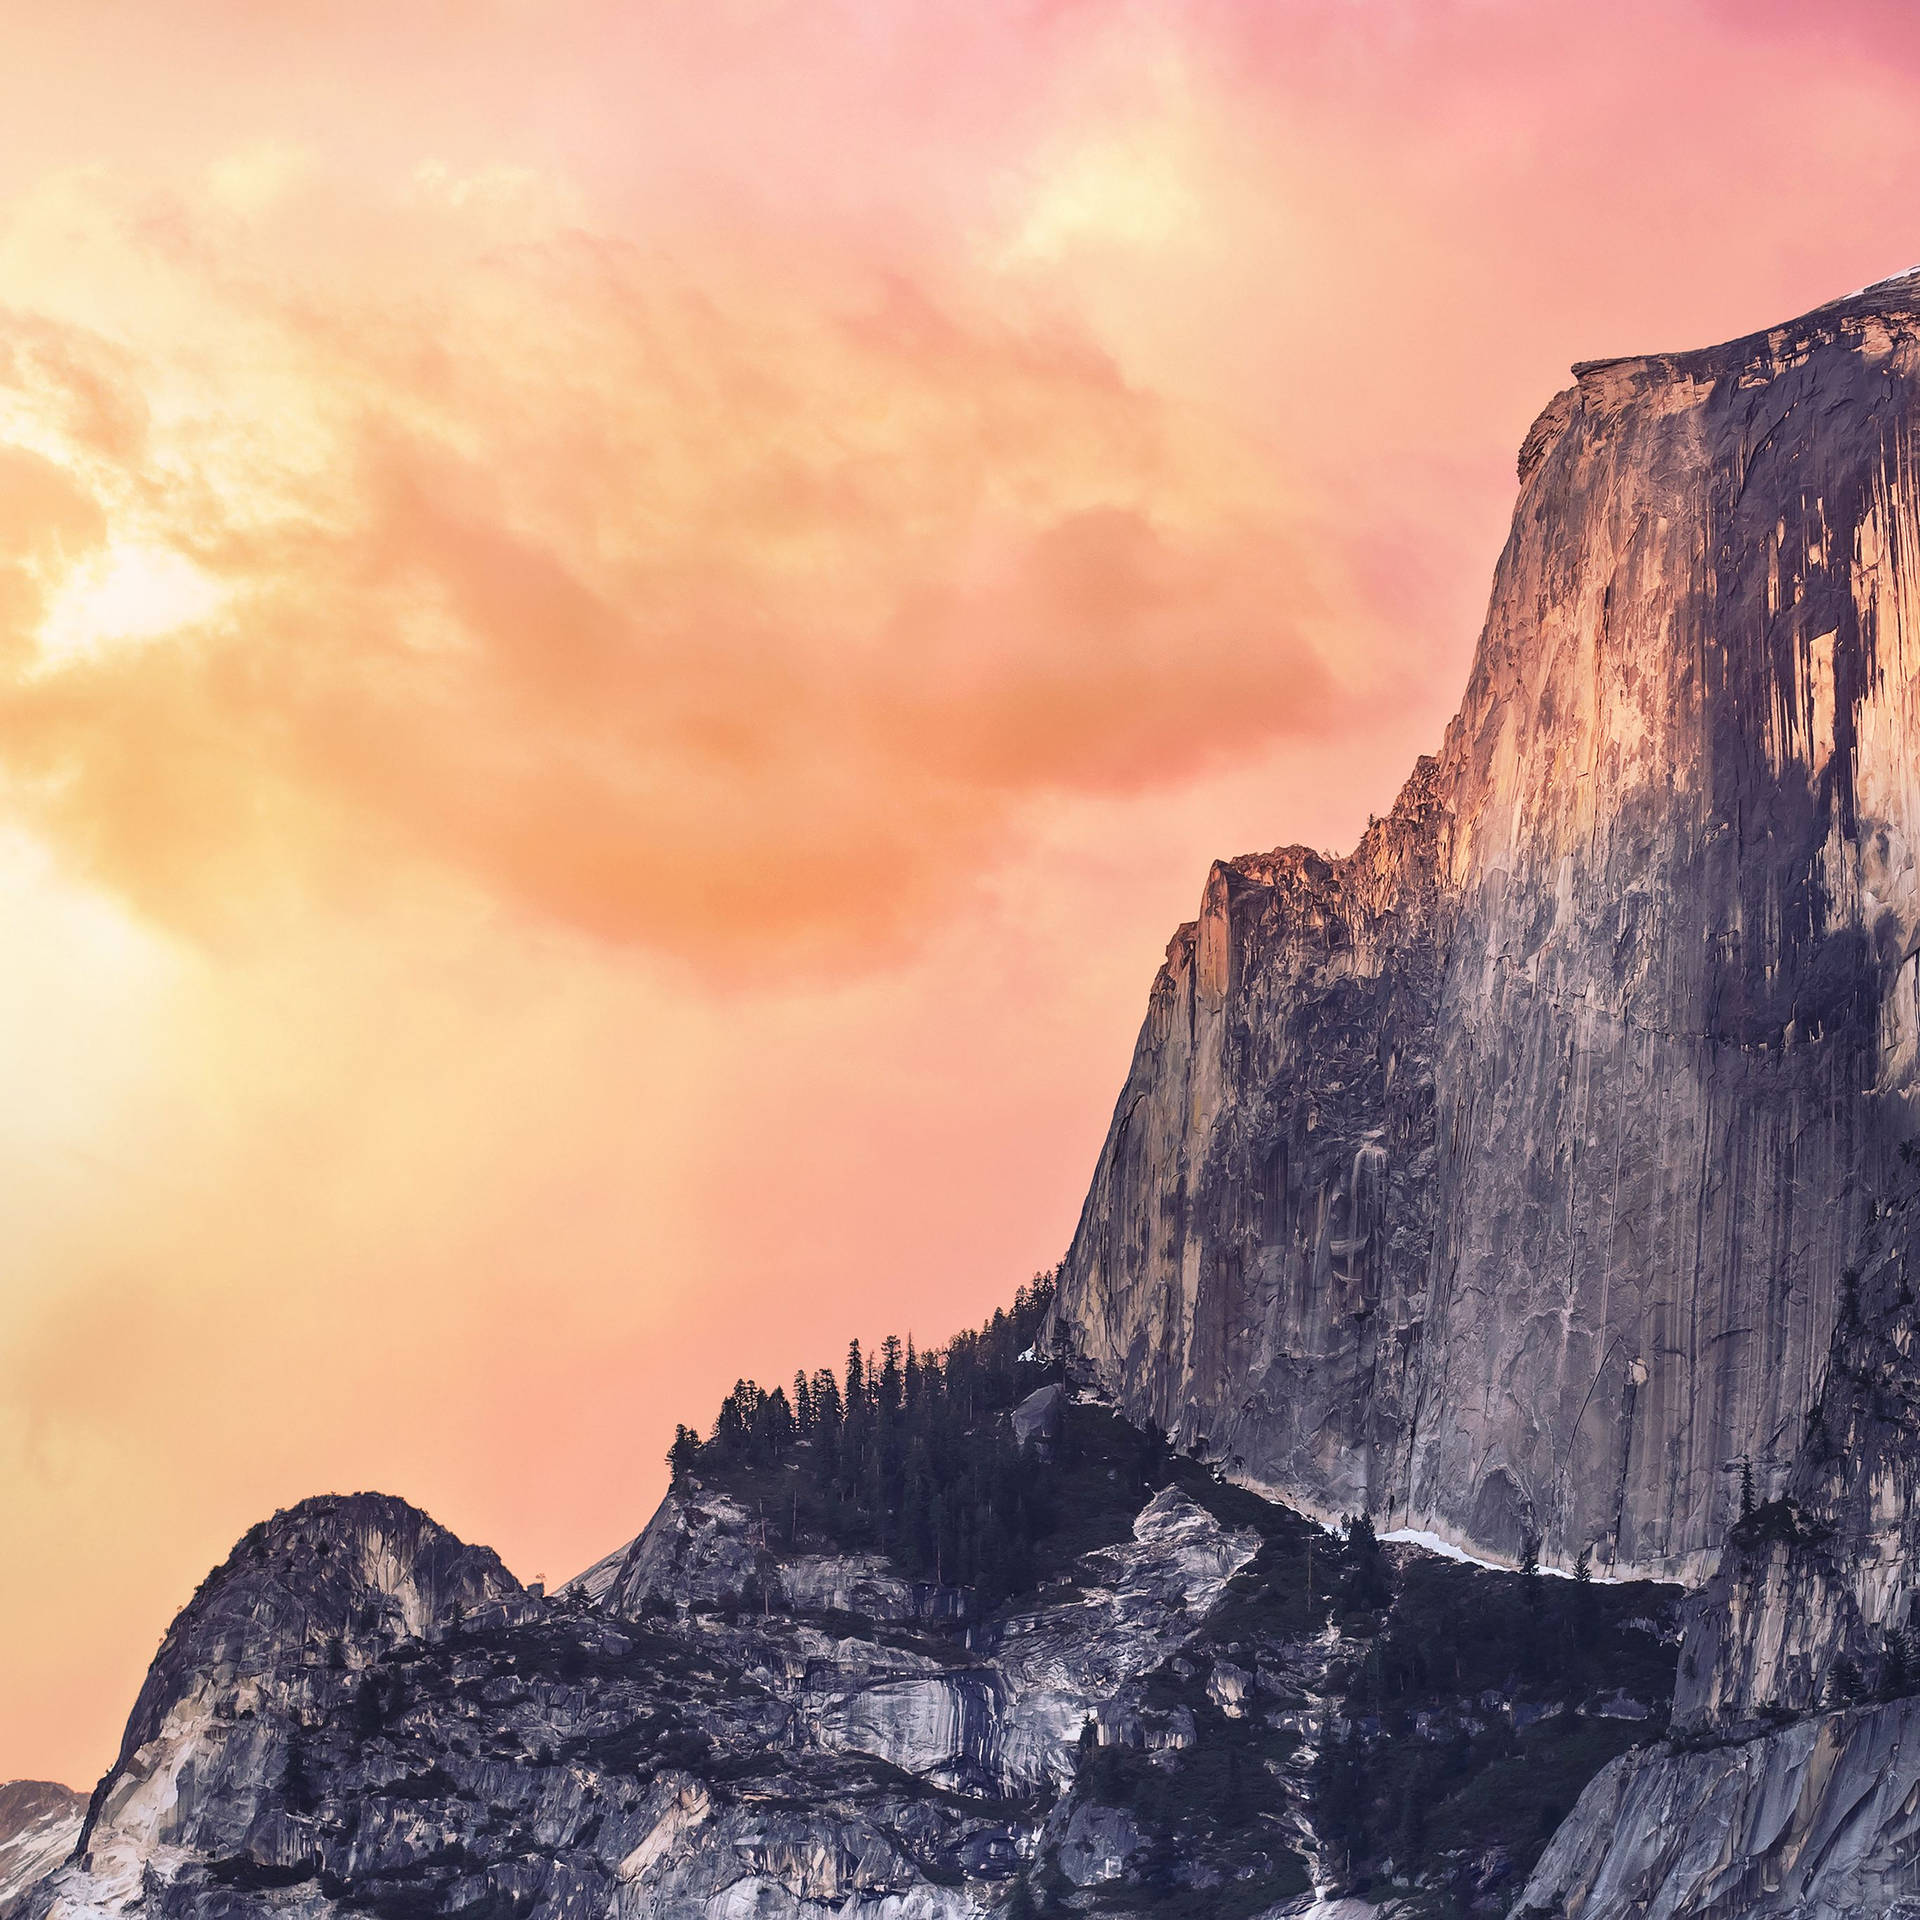 "Experience the Natural Beauty of Yosemite Valley" Wallpaper